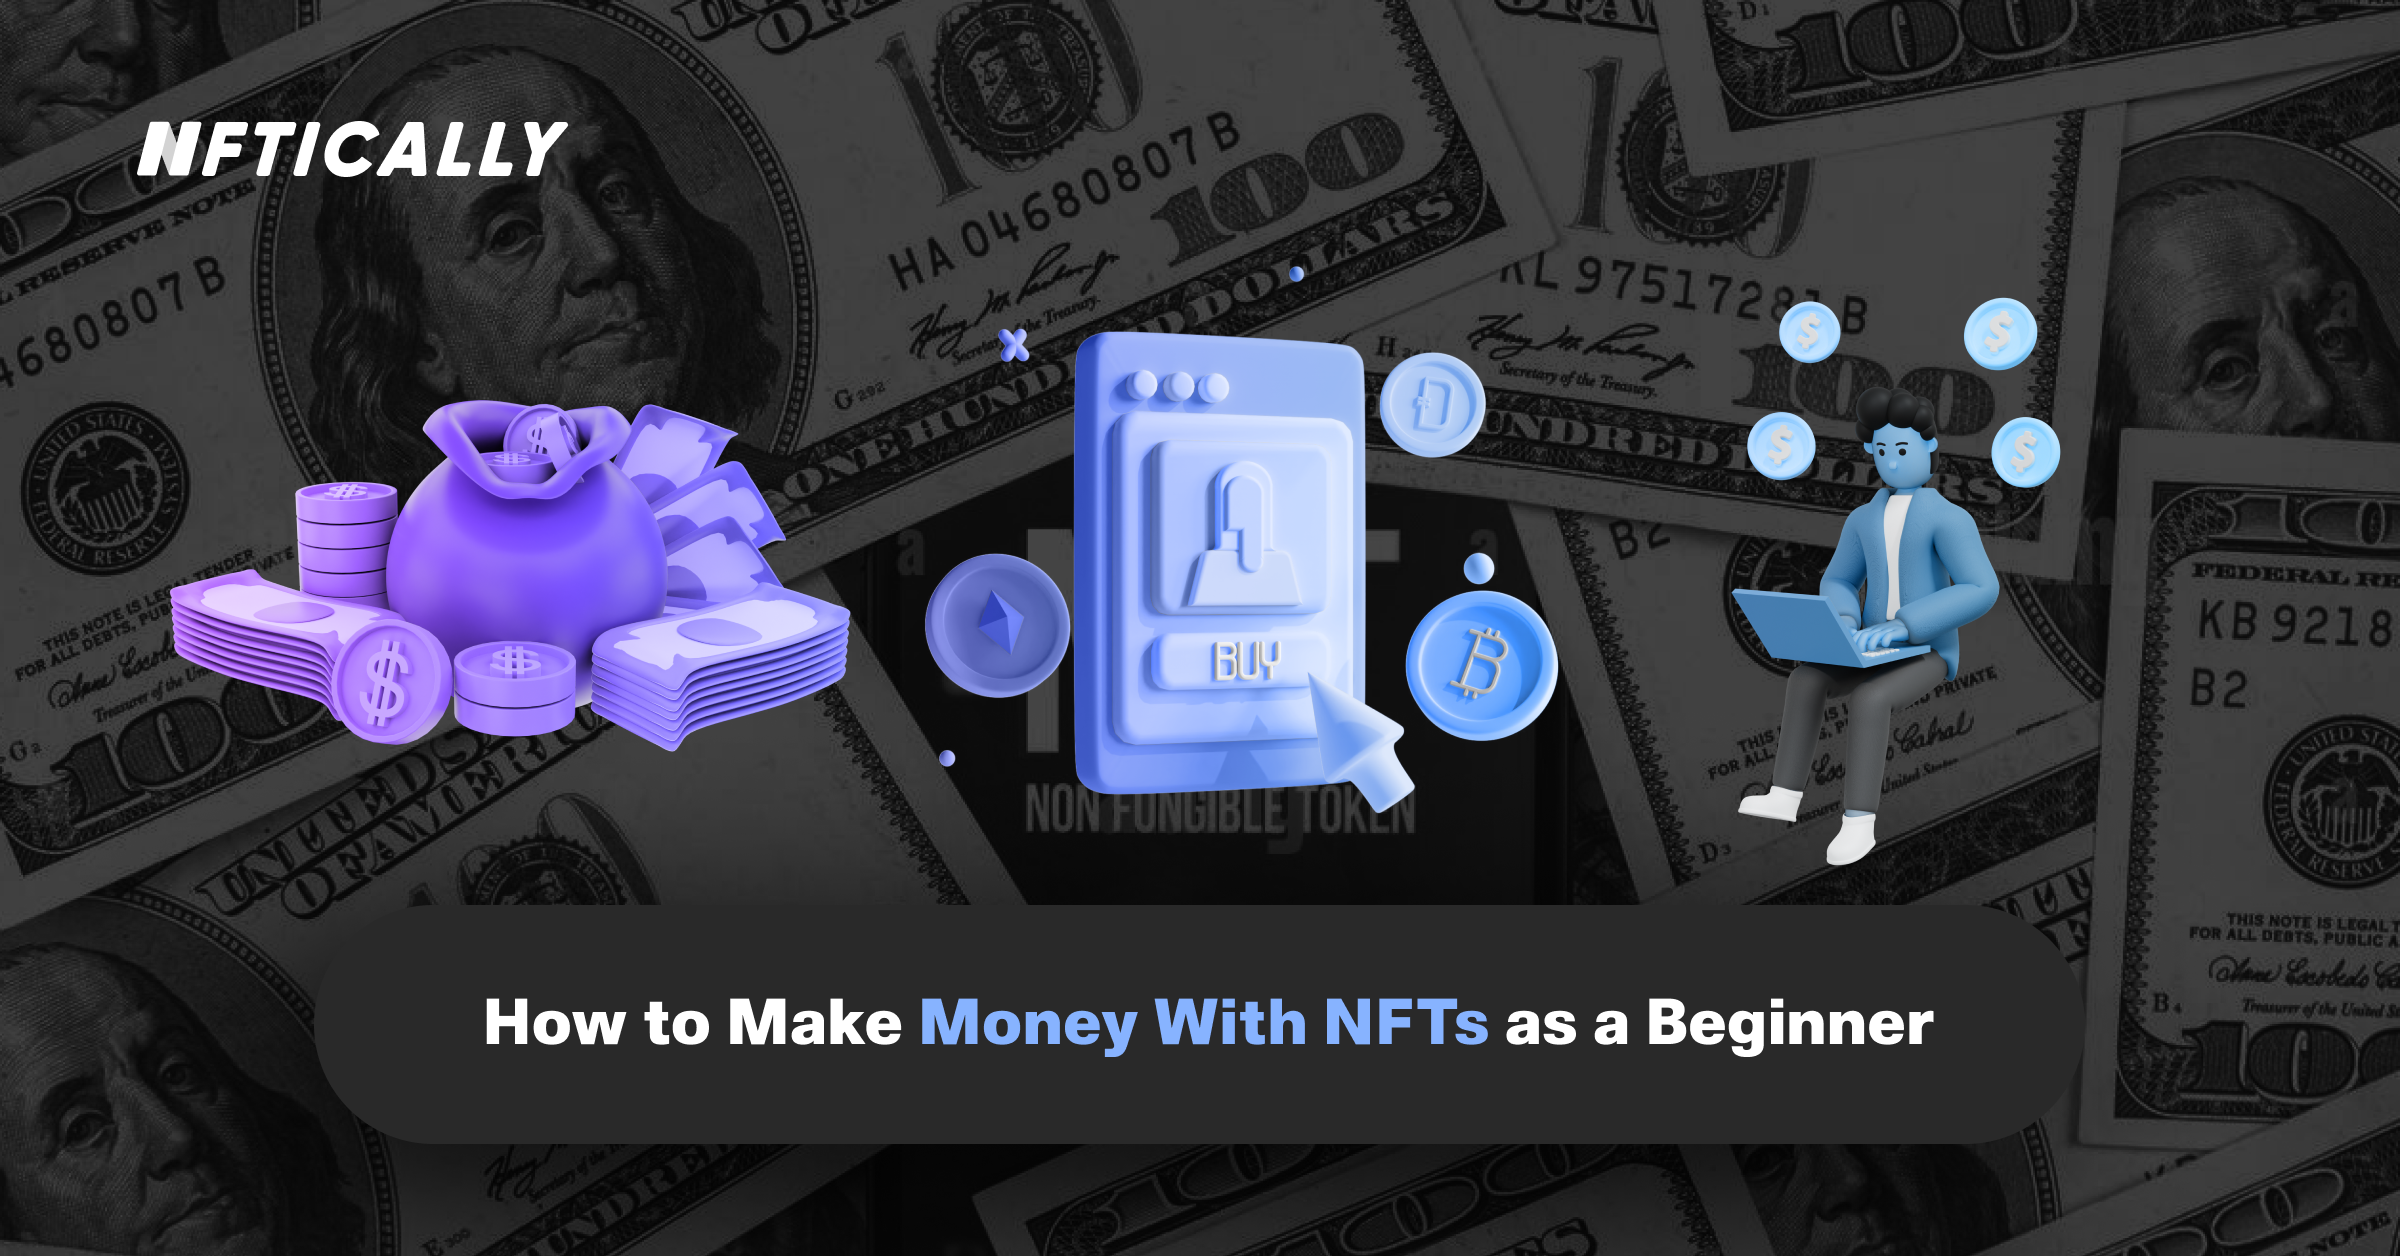 How to Make Money With NFTs as a Beginner